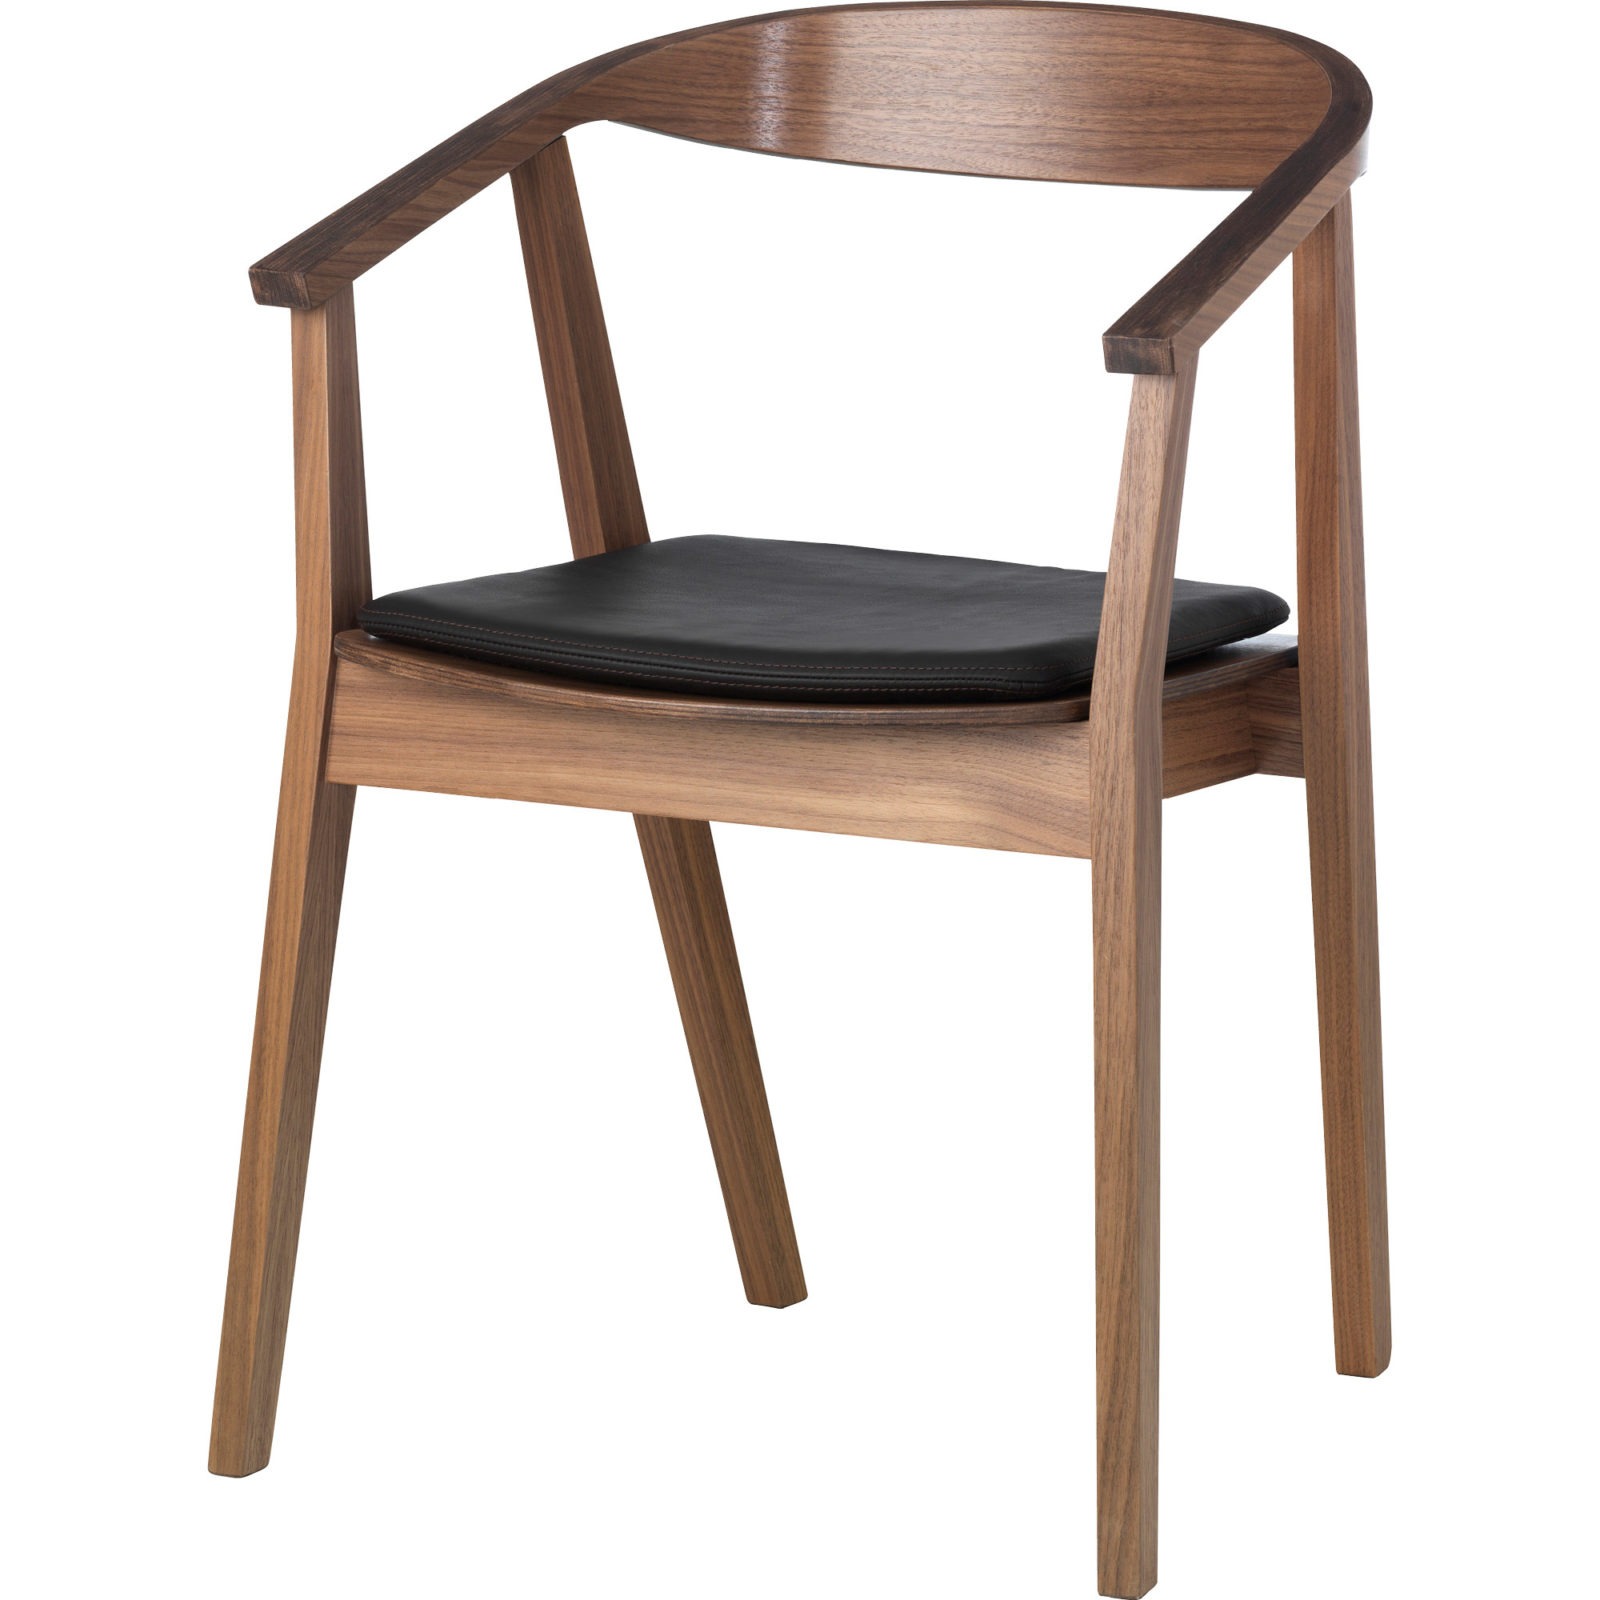 Solid walnut and walnut veneer chair in a classic, traditional, Scandinavian design.